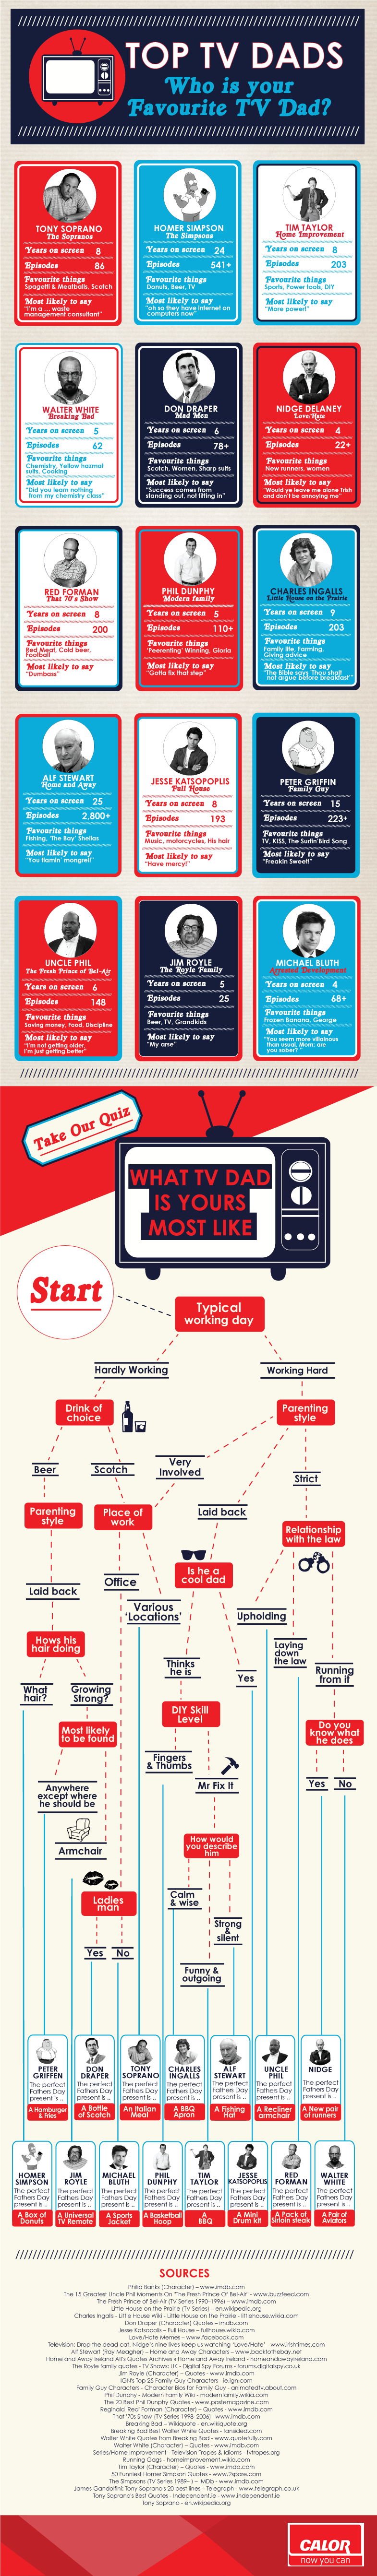 The World’s Top TV Dad